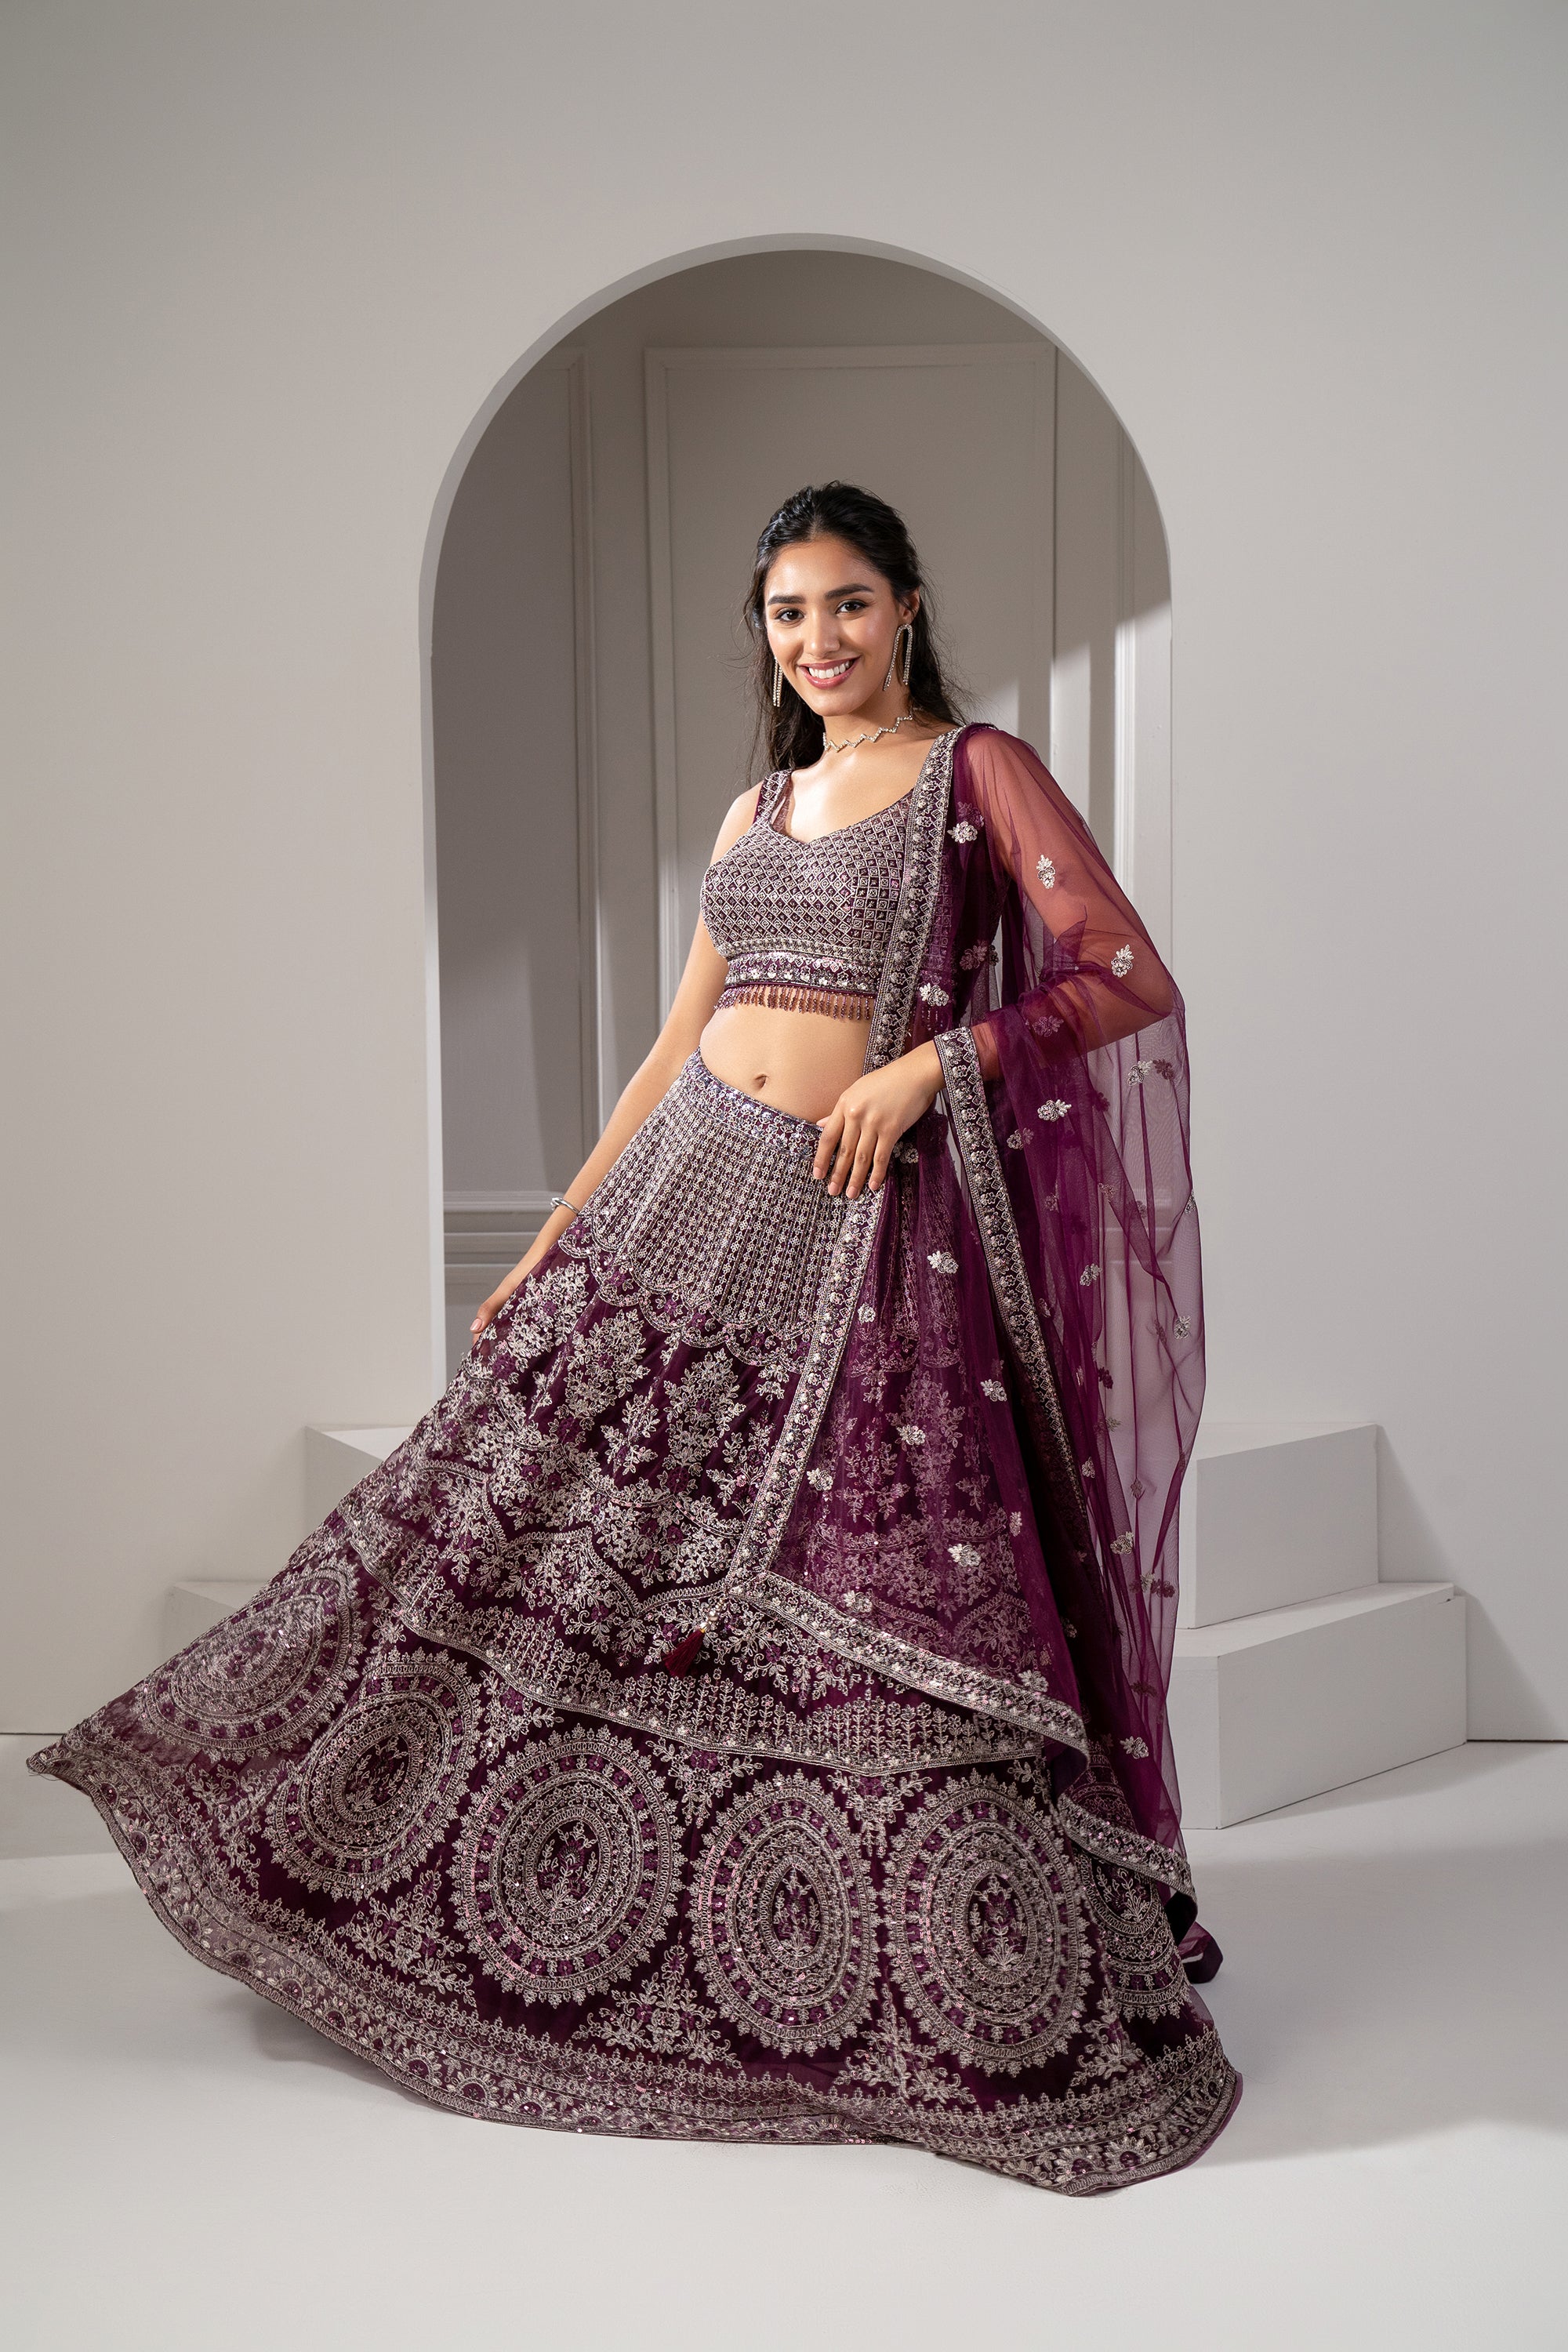 Buy Kiara Advani Style Wedding Lehenga Choli Bollywood Celebrities Lengha  Made Georgette With Sequins Thread and Embroidery Work Lenghas Online in  India - Etsy